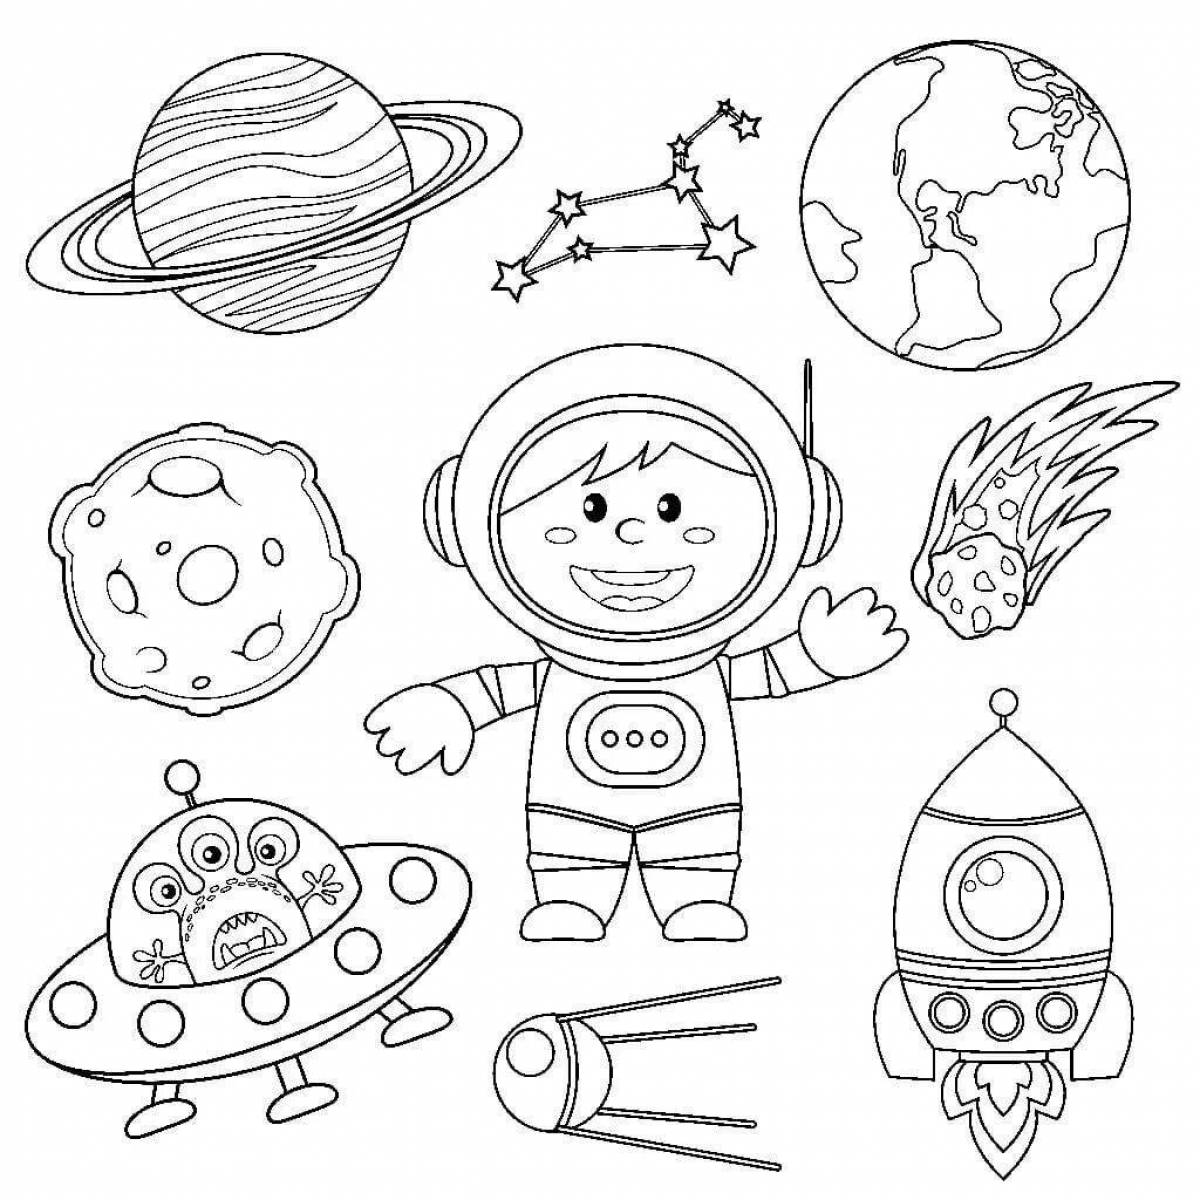 Wonderful astronaut with spaceship coloring book